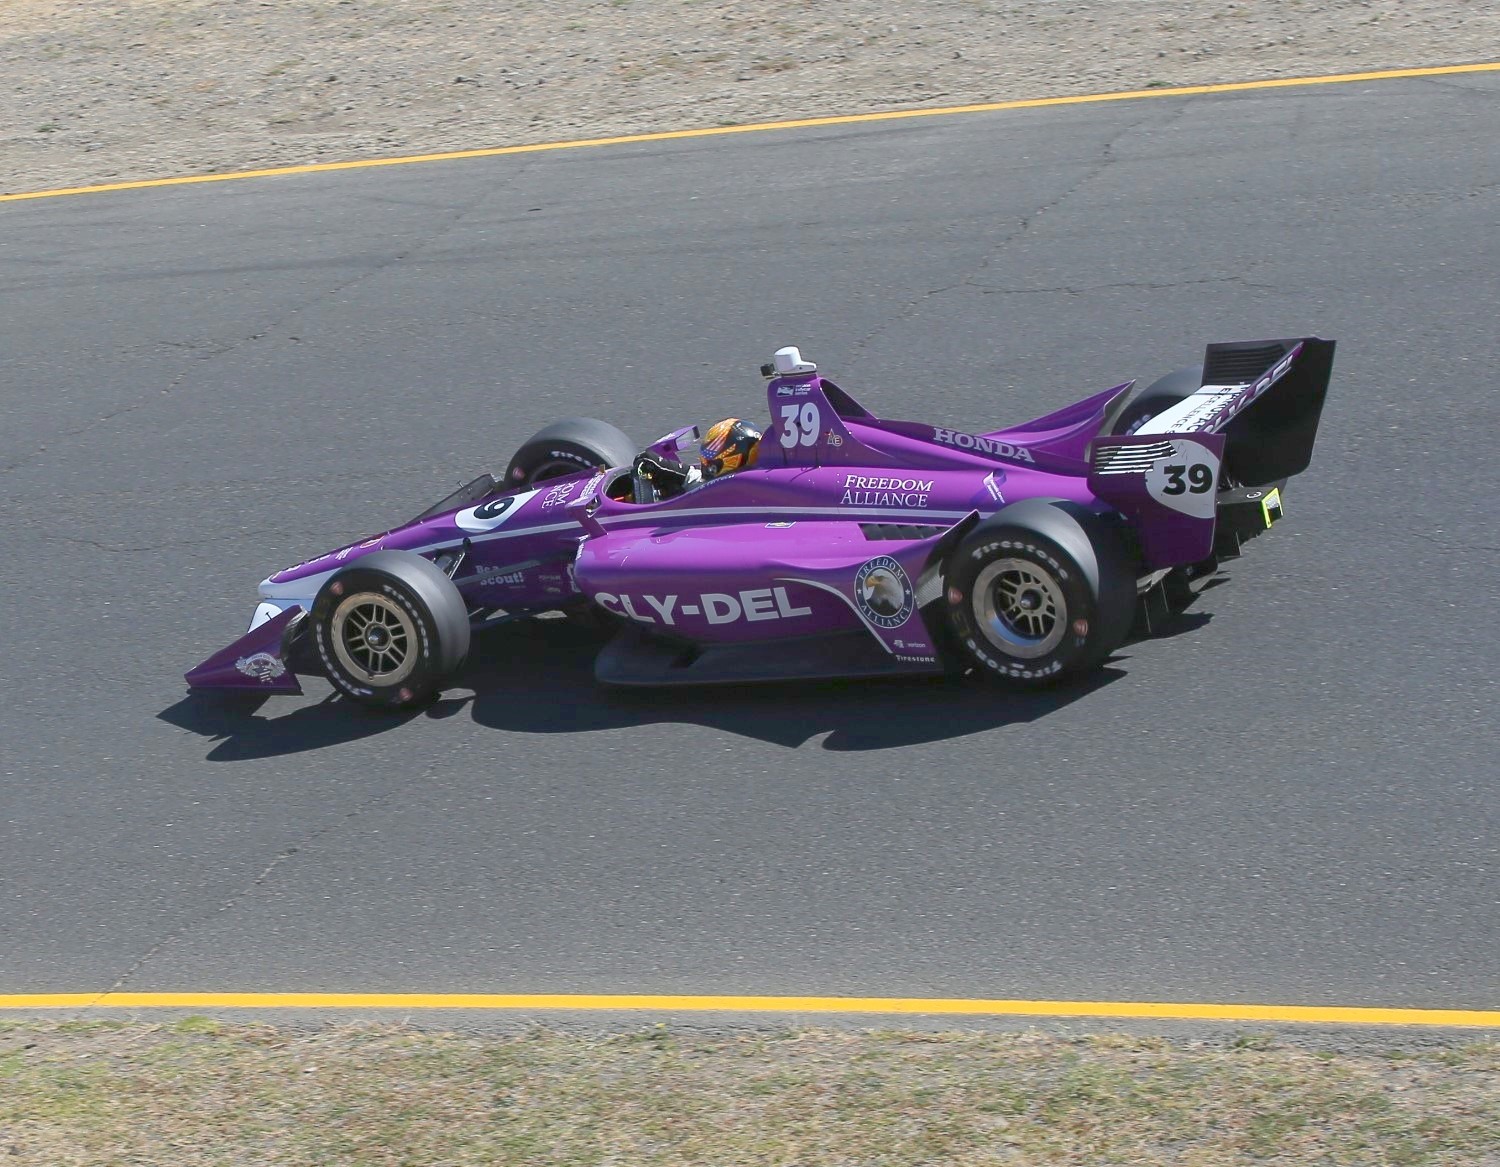 Will we see the purple Cly-Del car full-time in 2019?